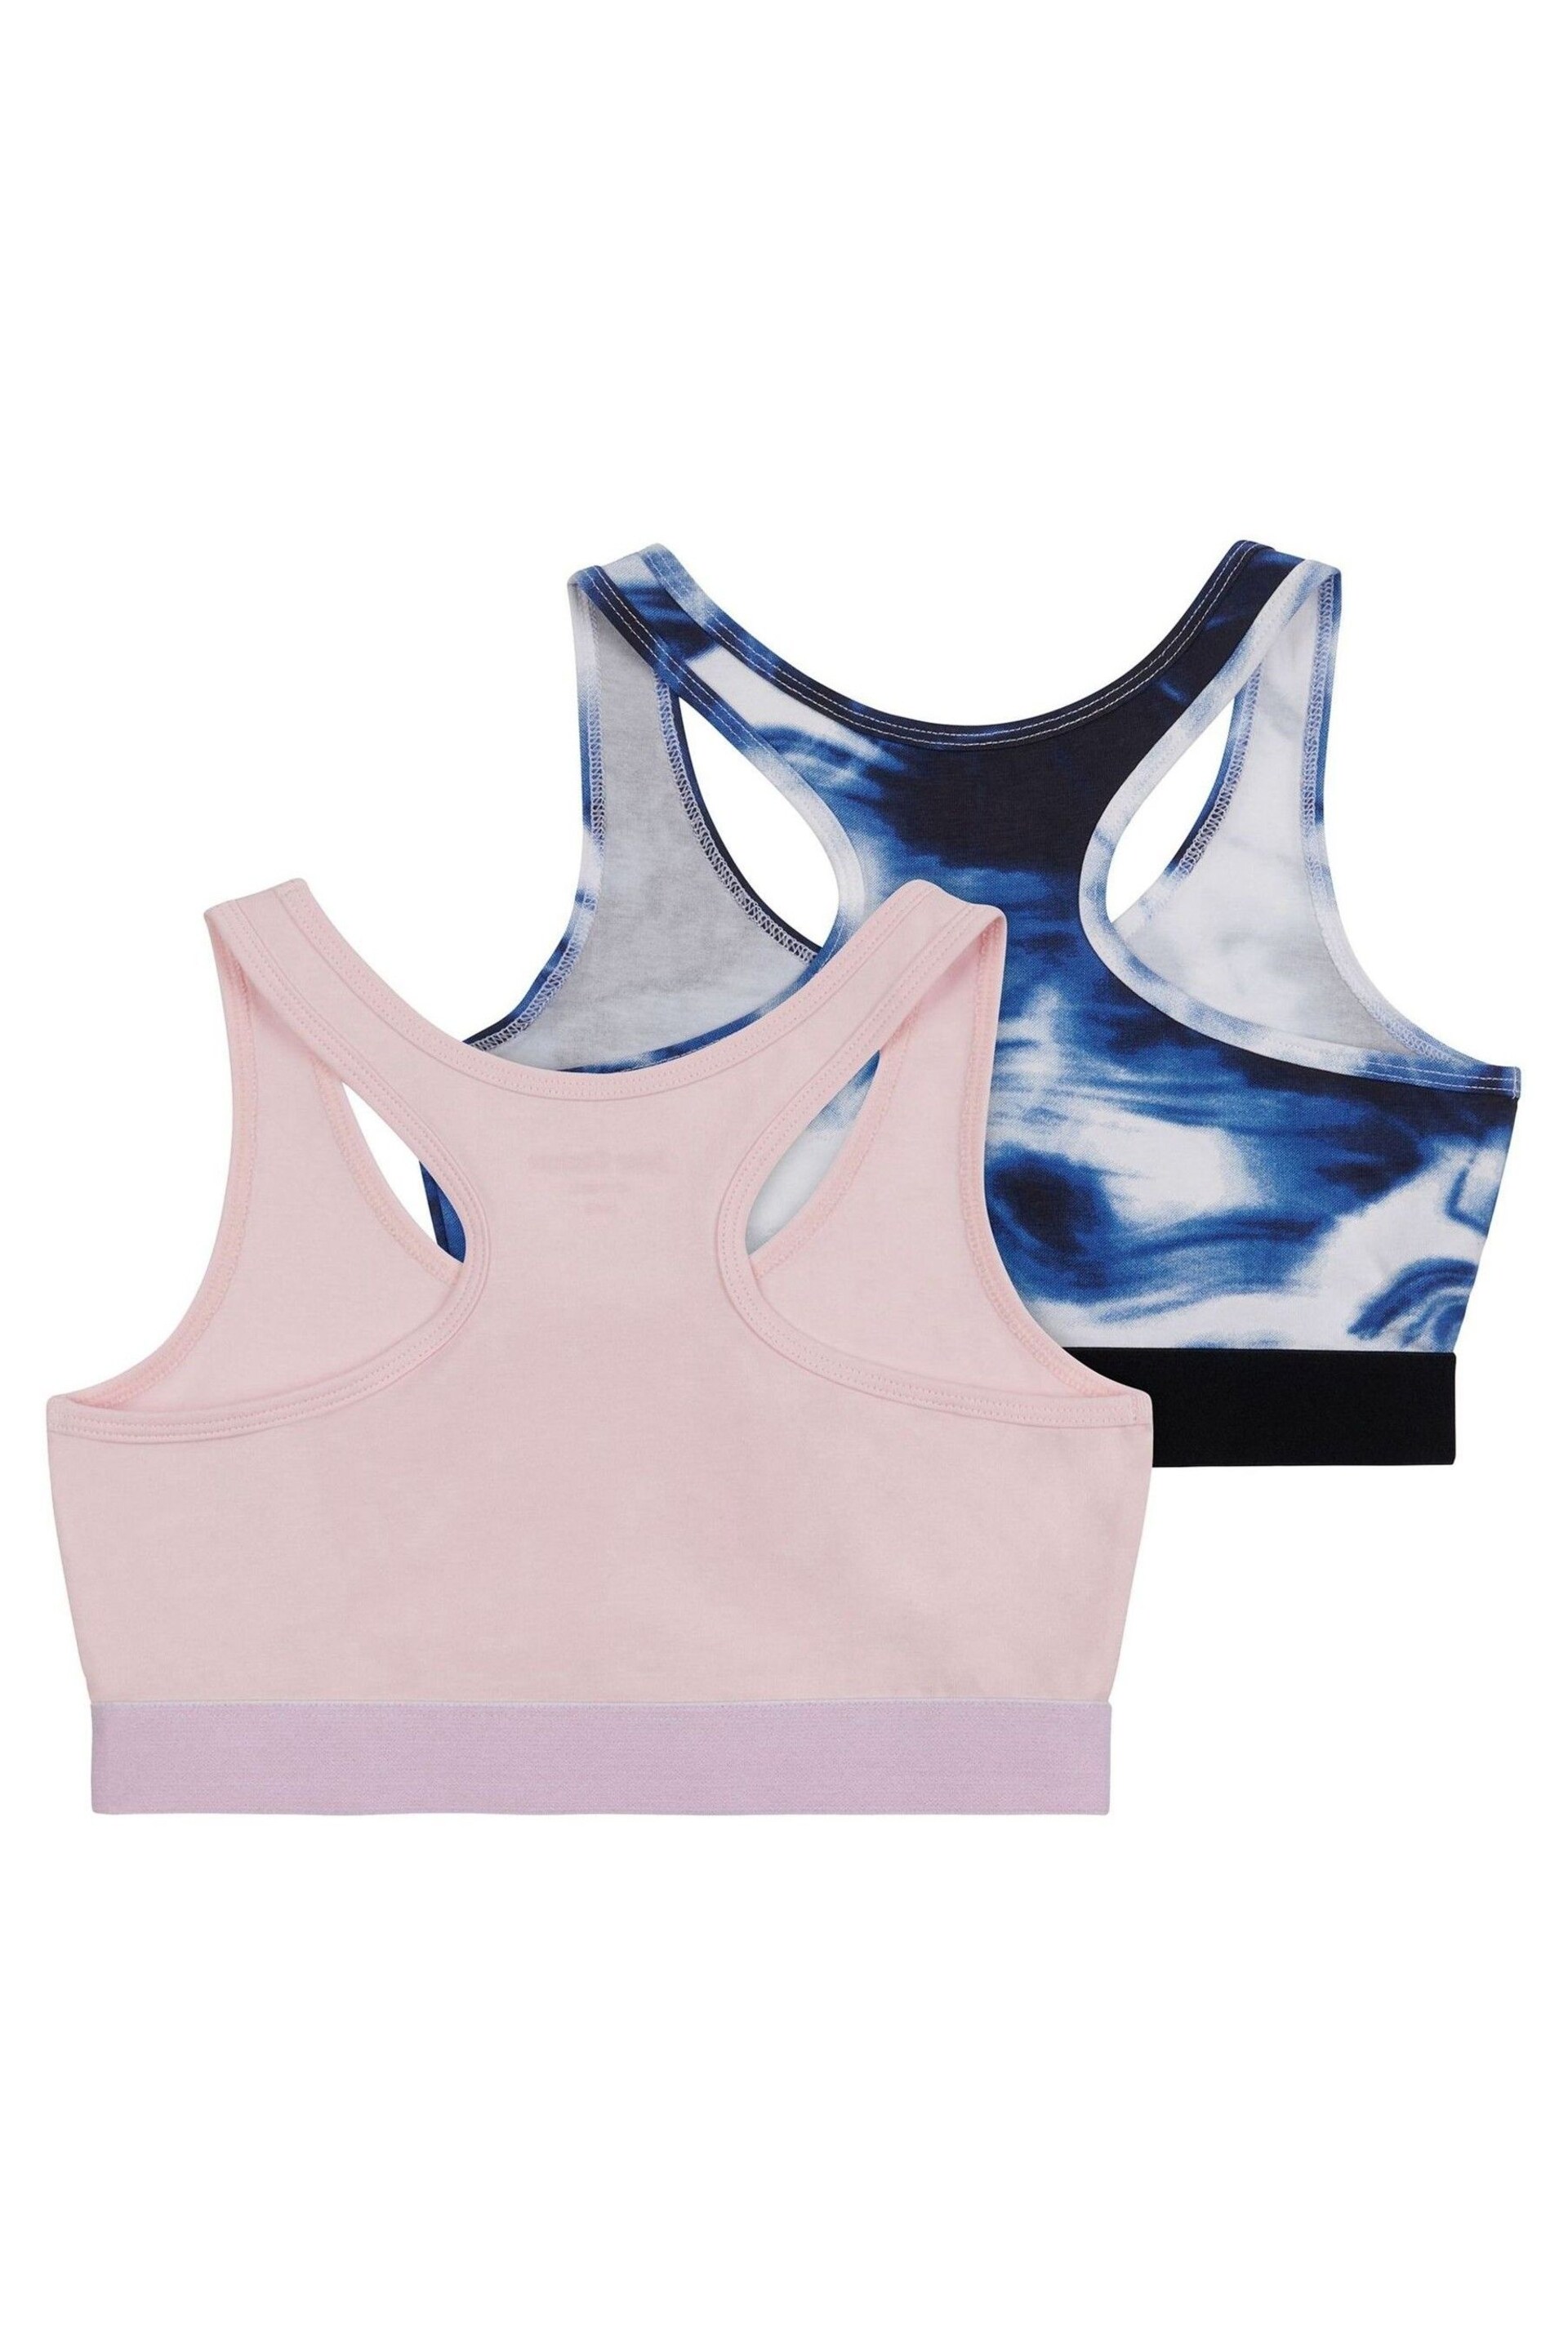 Juicy Couture Girls Blue Crop Tops 2 Pack - Image 2 of 2